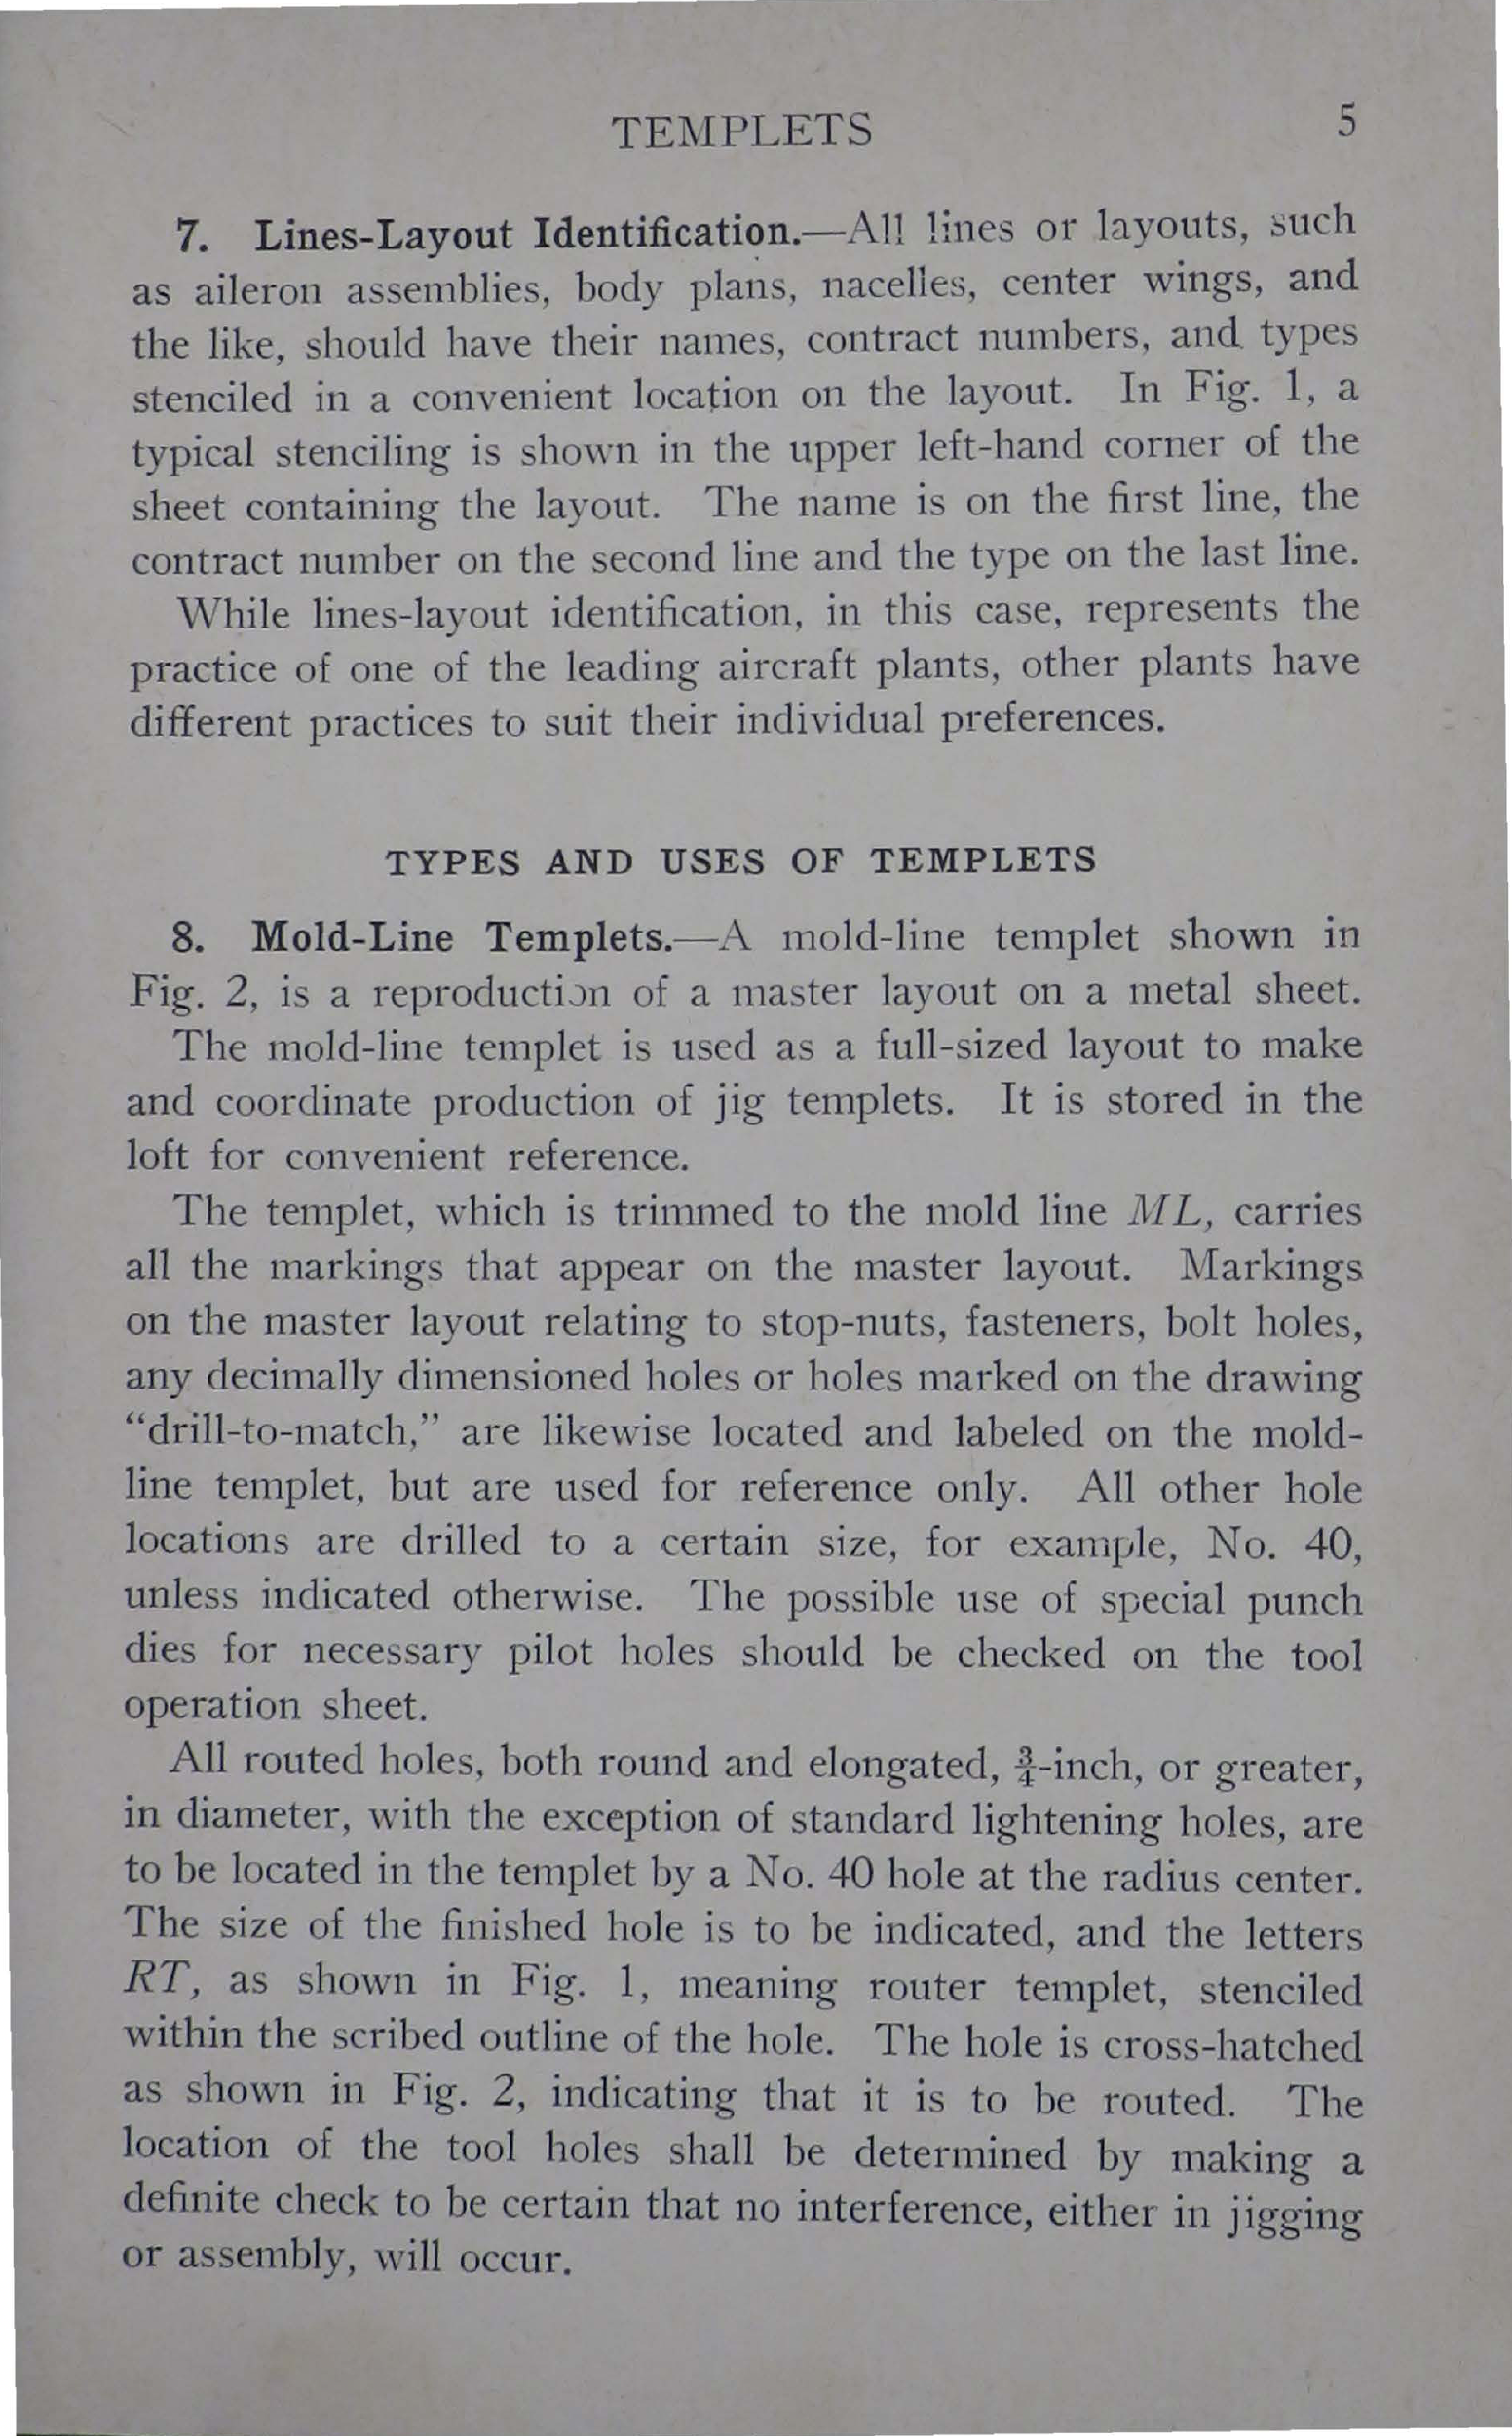 Sample page 7 from AirCorps Library document: Aircraft Tooling - Templets - Bureau of Aeronautics